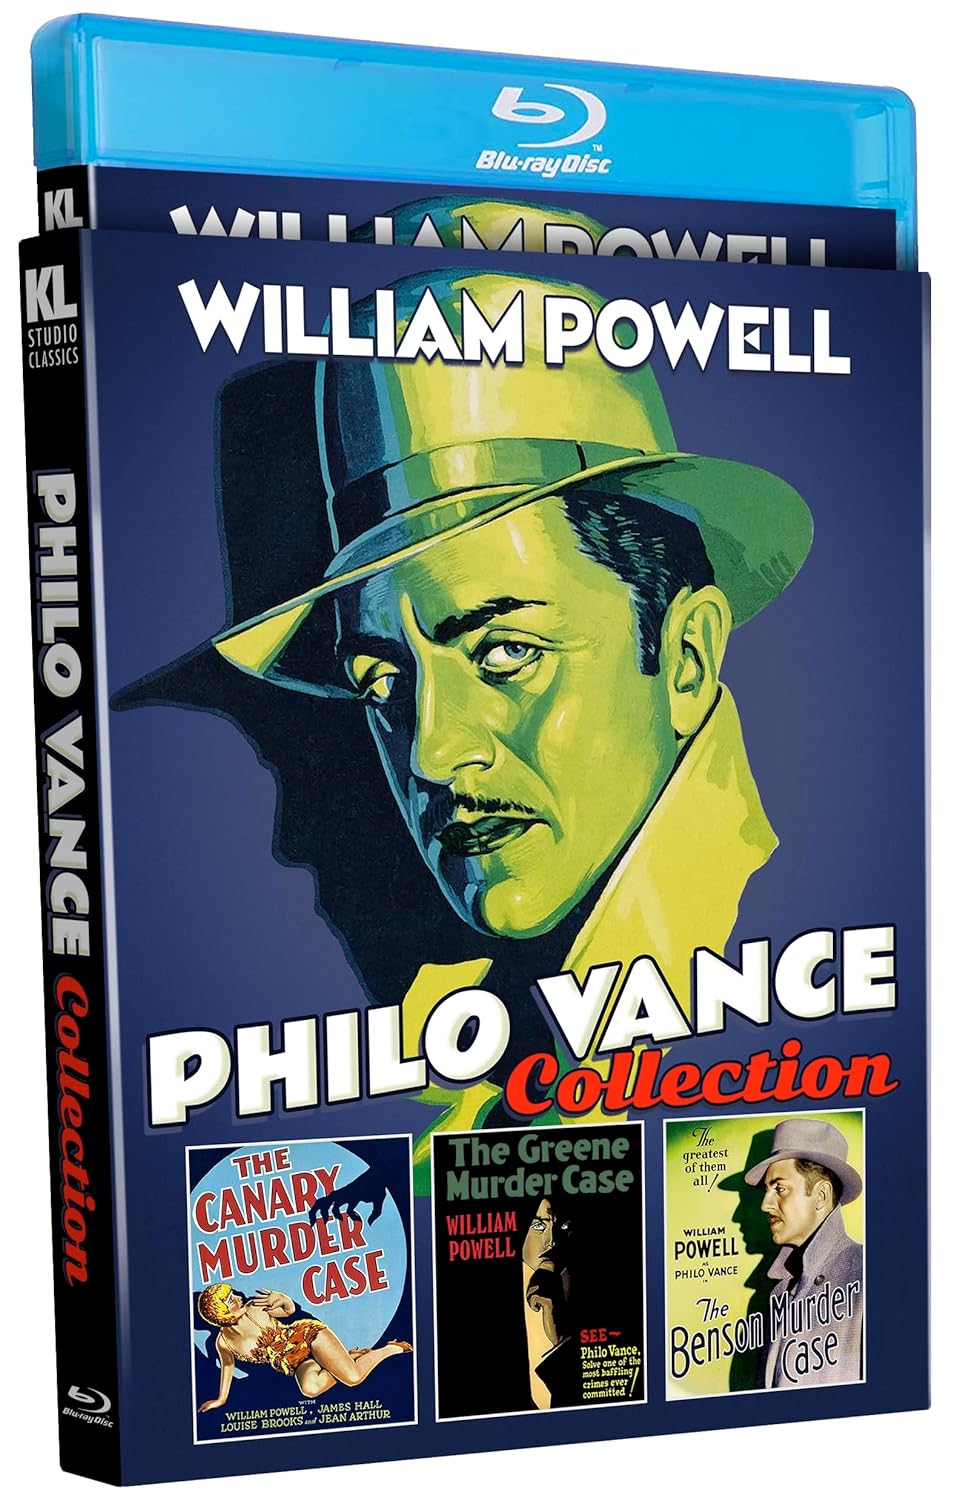 PHILO VANCE COLLECTION BLU-RAY [PRE-ORDER]